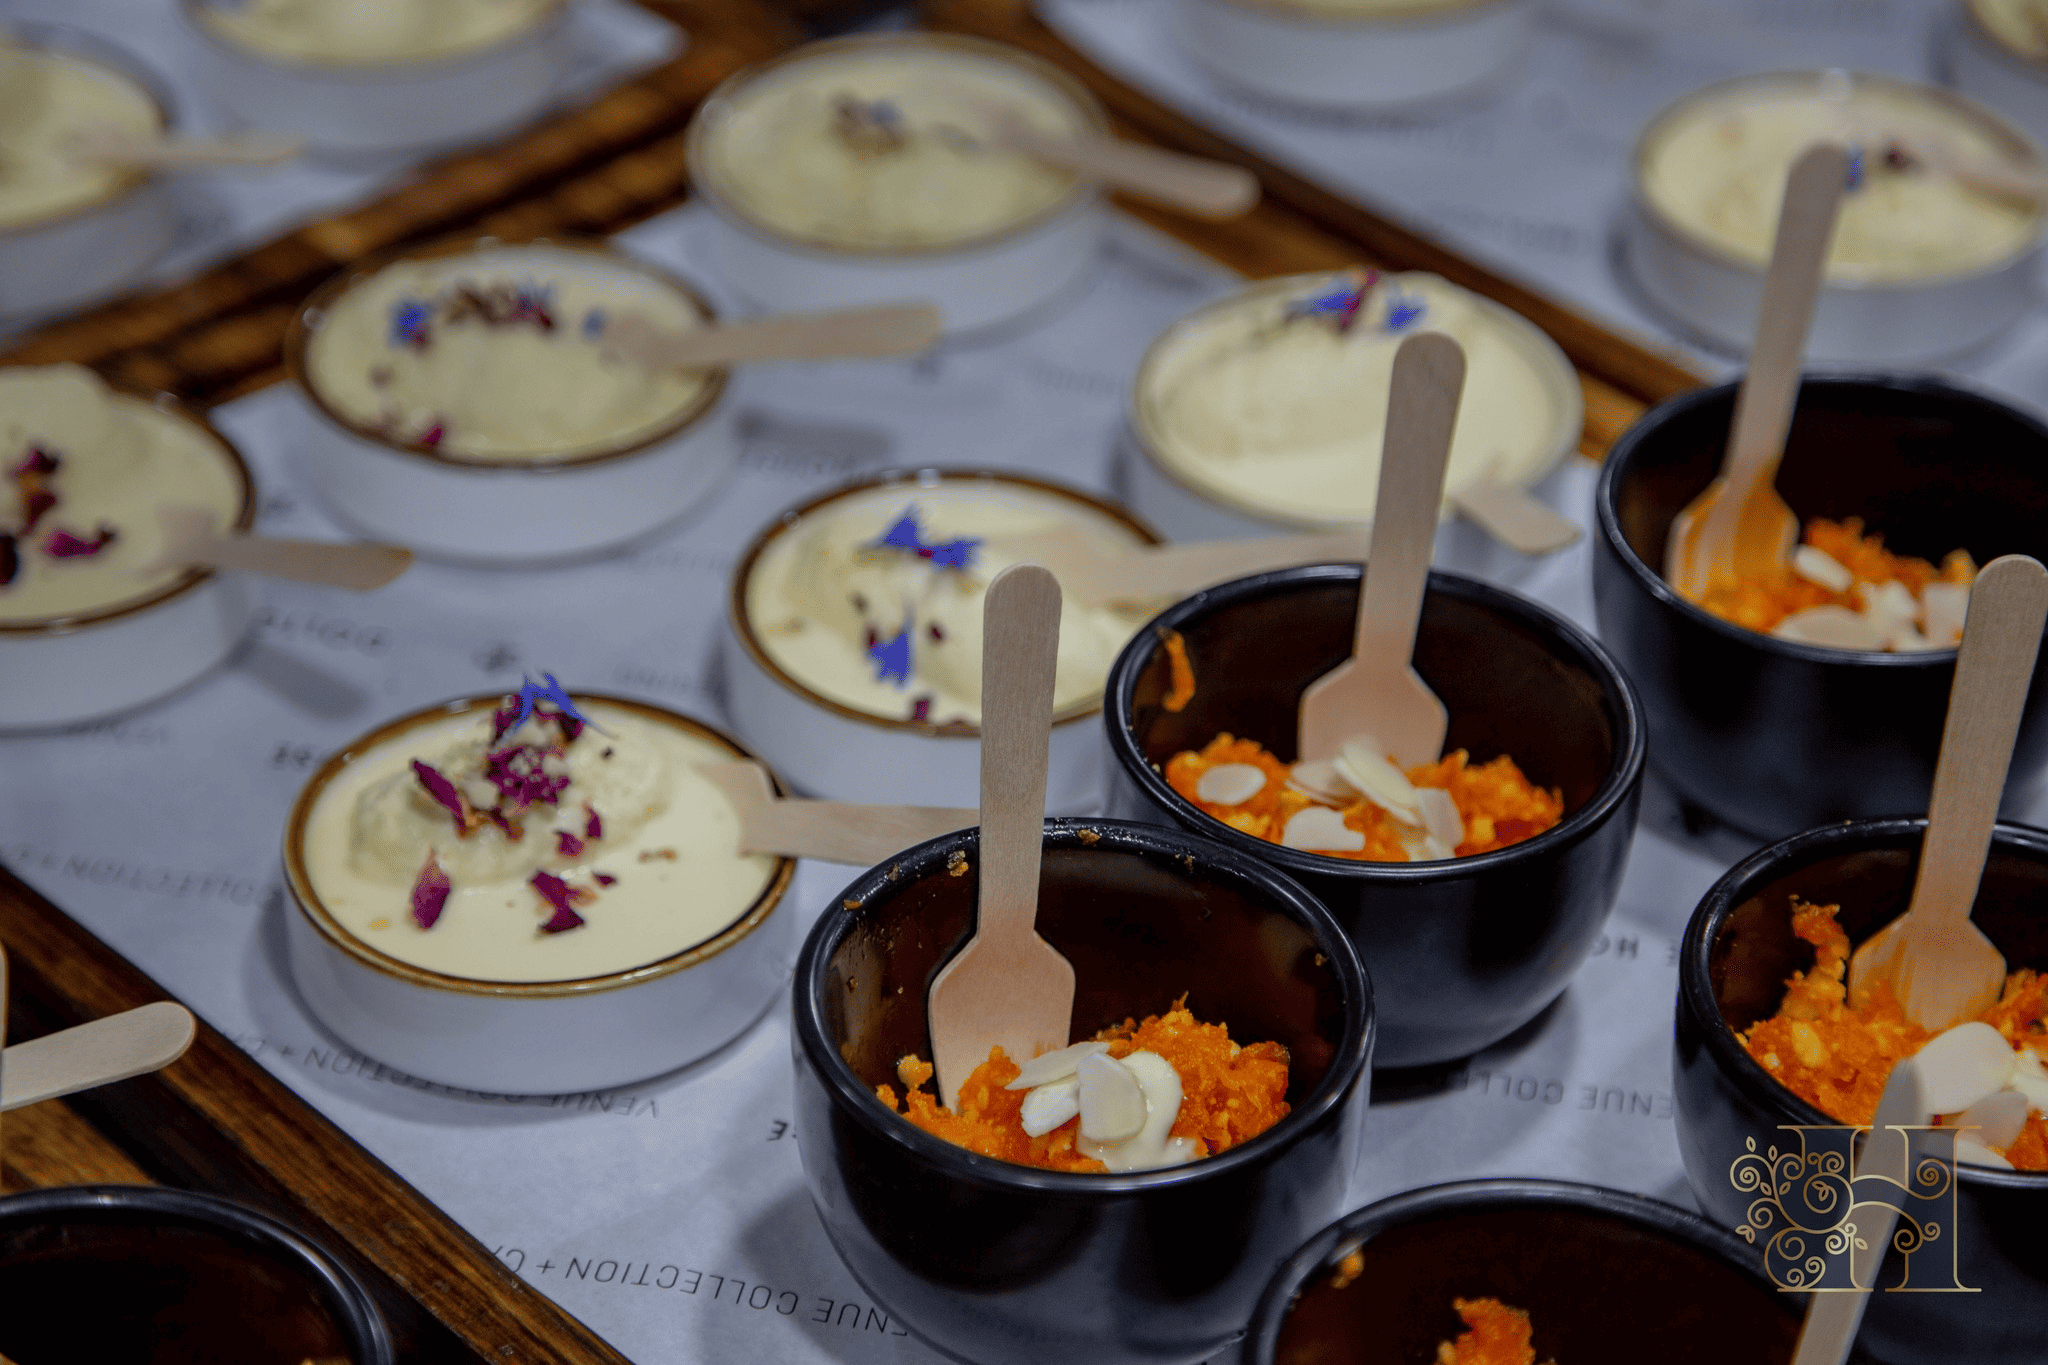 Assortment of Indian desserts featuring ras malai and gajar halwa served in decorative bowls.